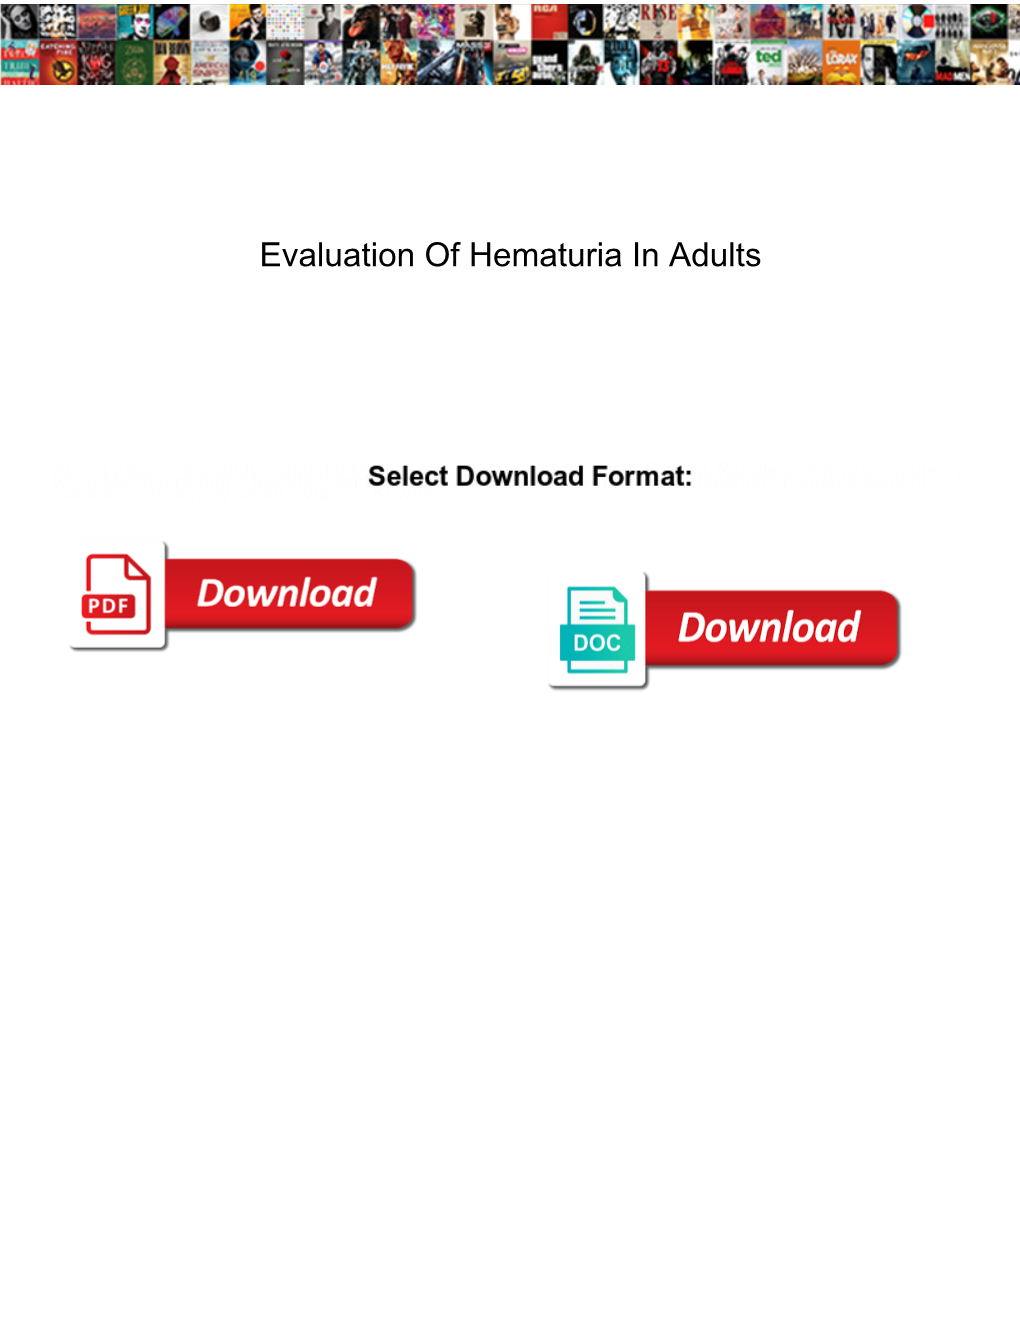 Evaluation of Hematuria in Adults